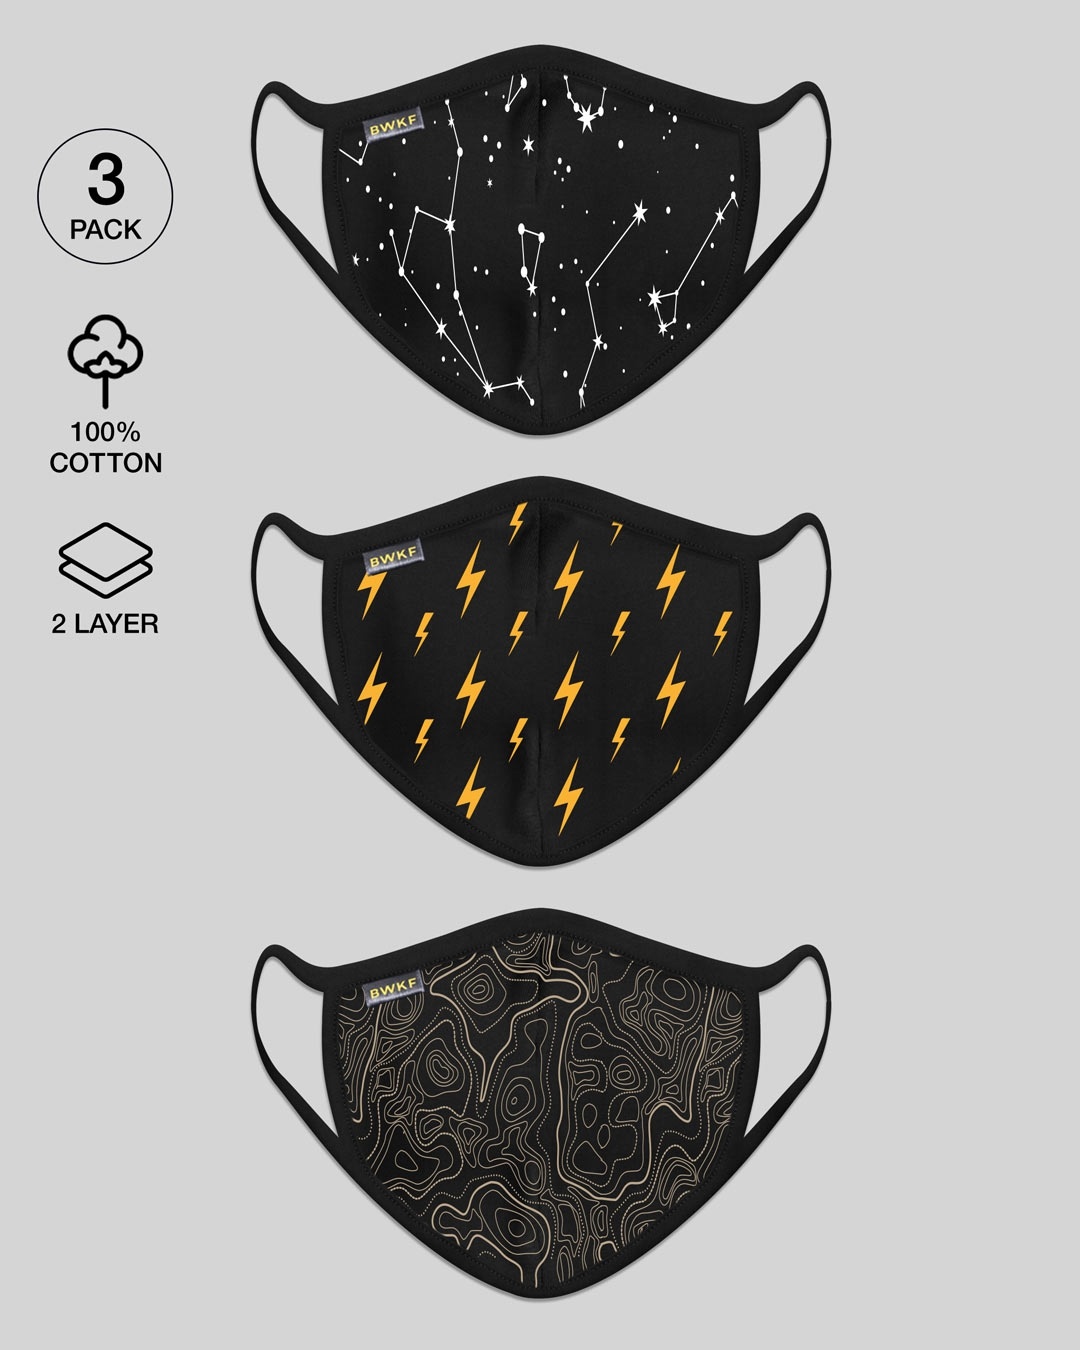 Shop 2-Layer Everyday Protective Masks - Pack of 3 (Constellations-Thunder Bolts-Swirl Pattern)-Design